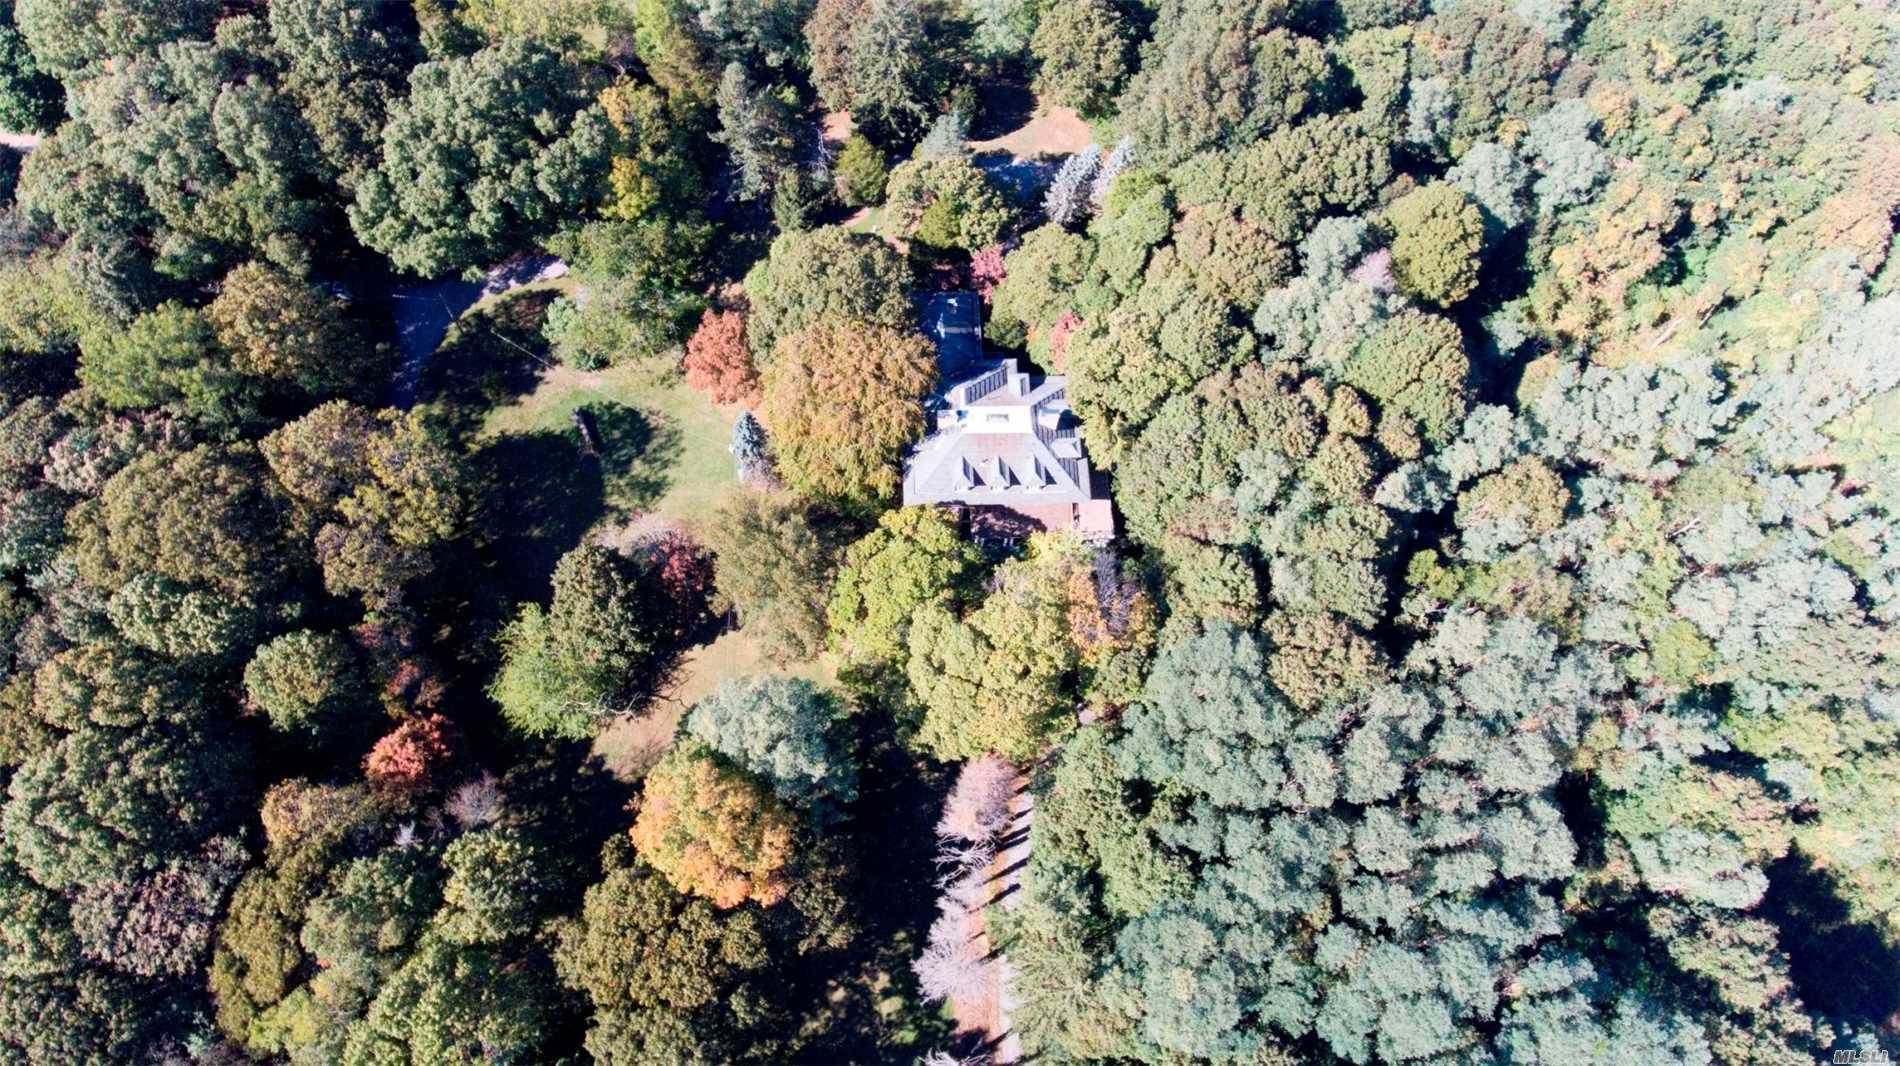 27. 63 Acres In The Hamlet Of Fort Salonga Conveniently Located 1 Hour From NYC Hamptons A Rare Opportunity With Possible Subdivision Two Separate Tax Lots Zoned 1 Acre Residential.